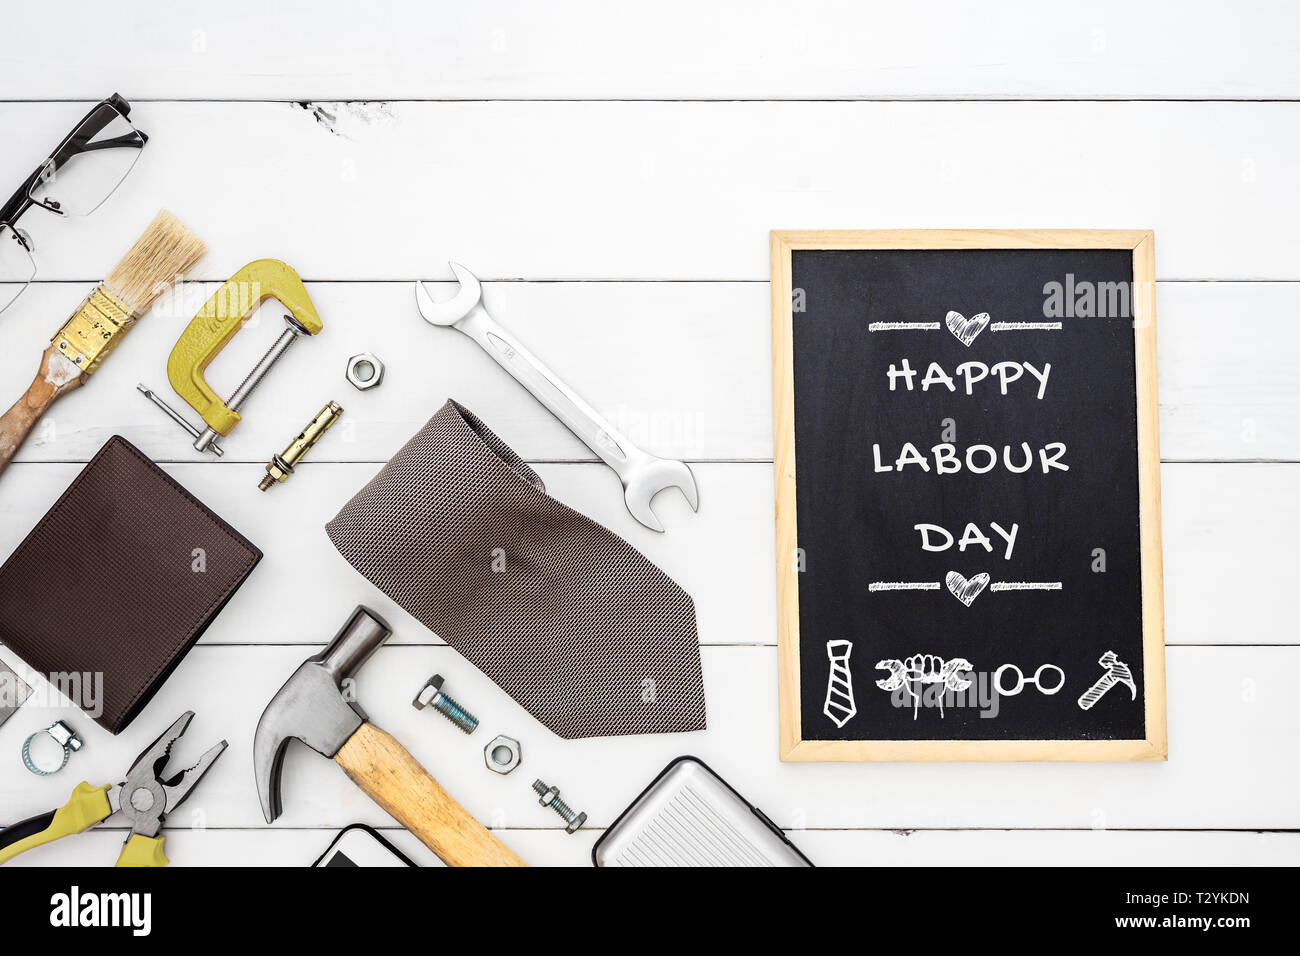 Happy Labour Day background concept. Flat lay of construction blue collar handy tools and white collar's accessories over wooden background with black Stock Photo